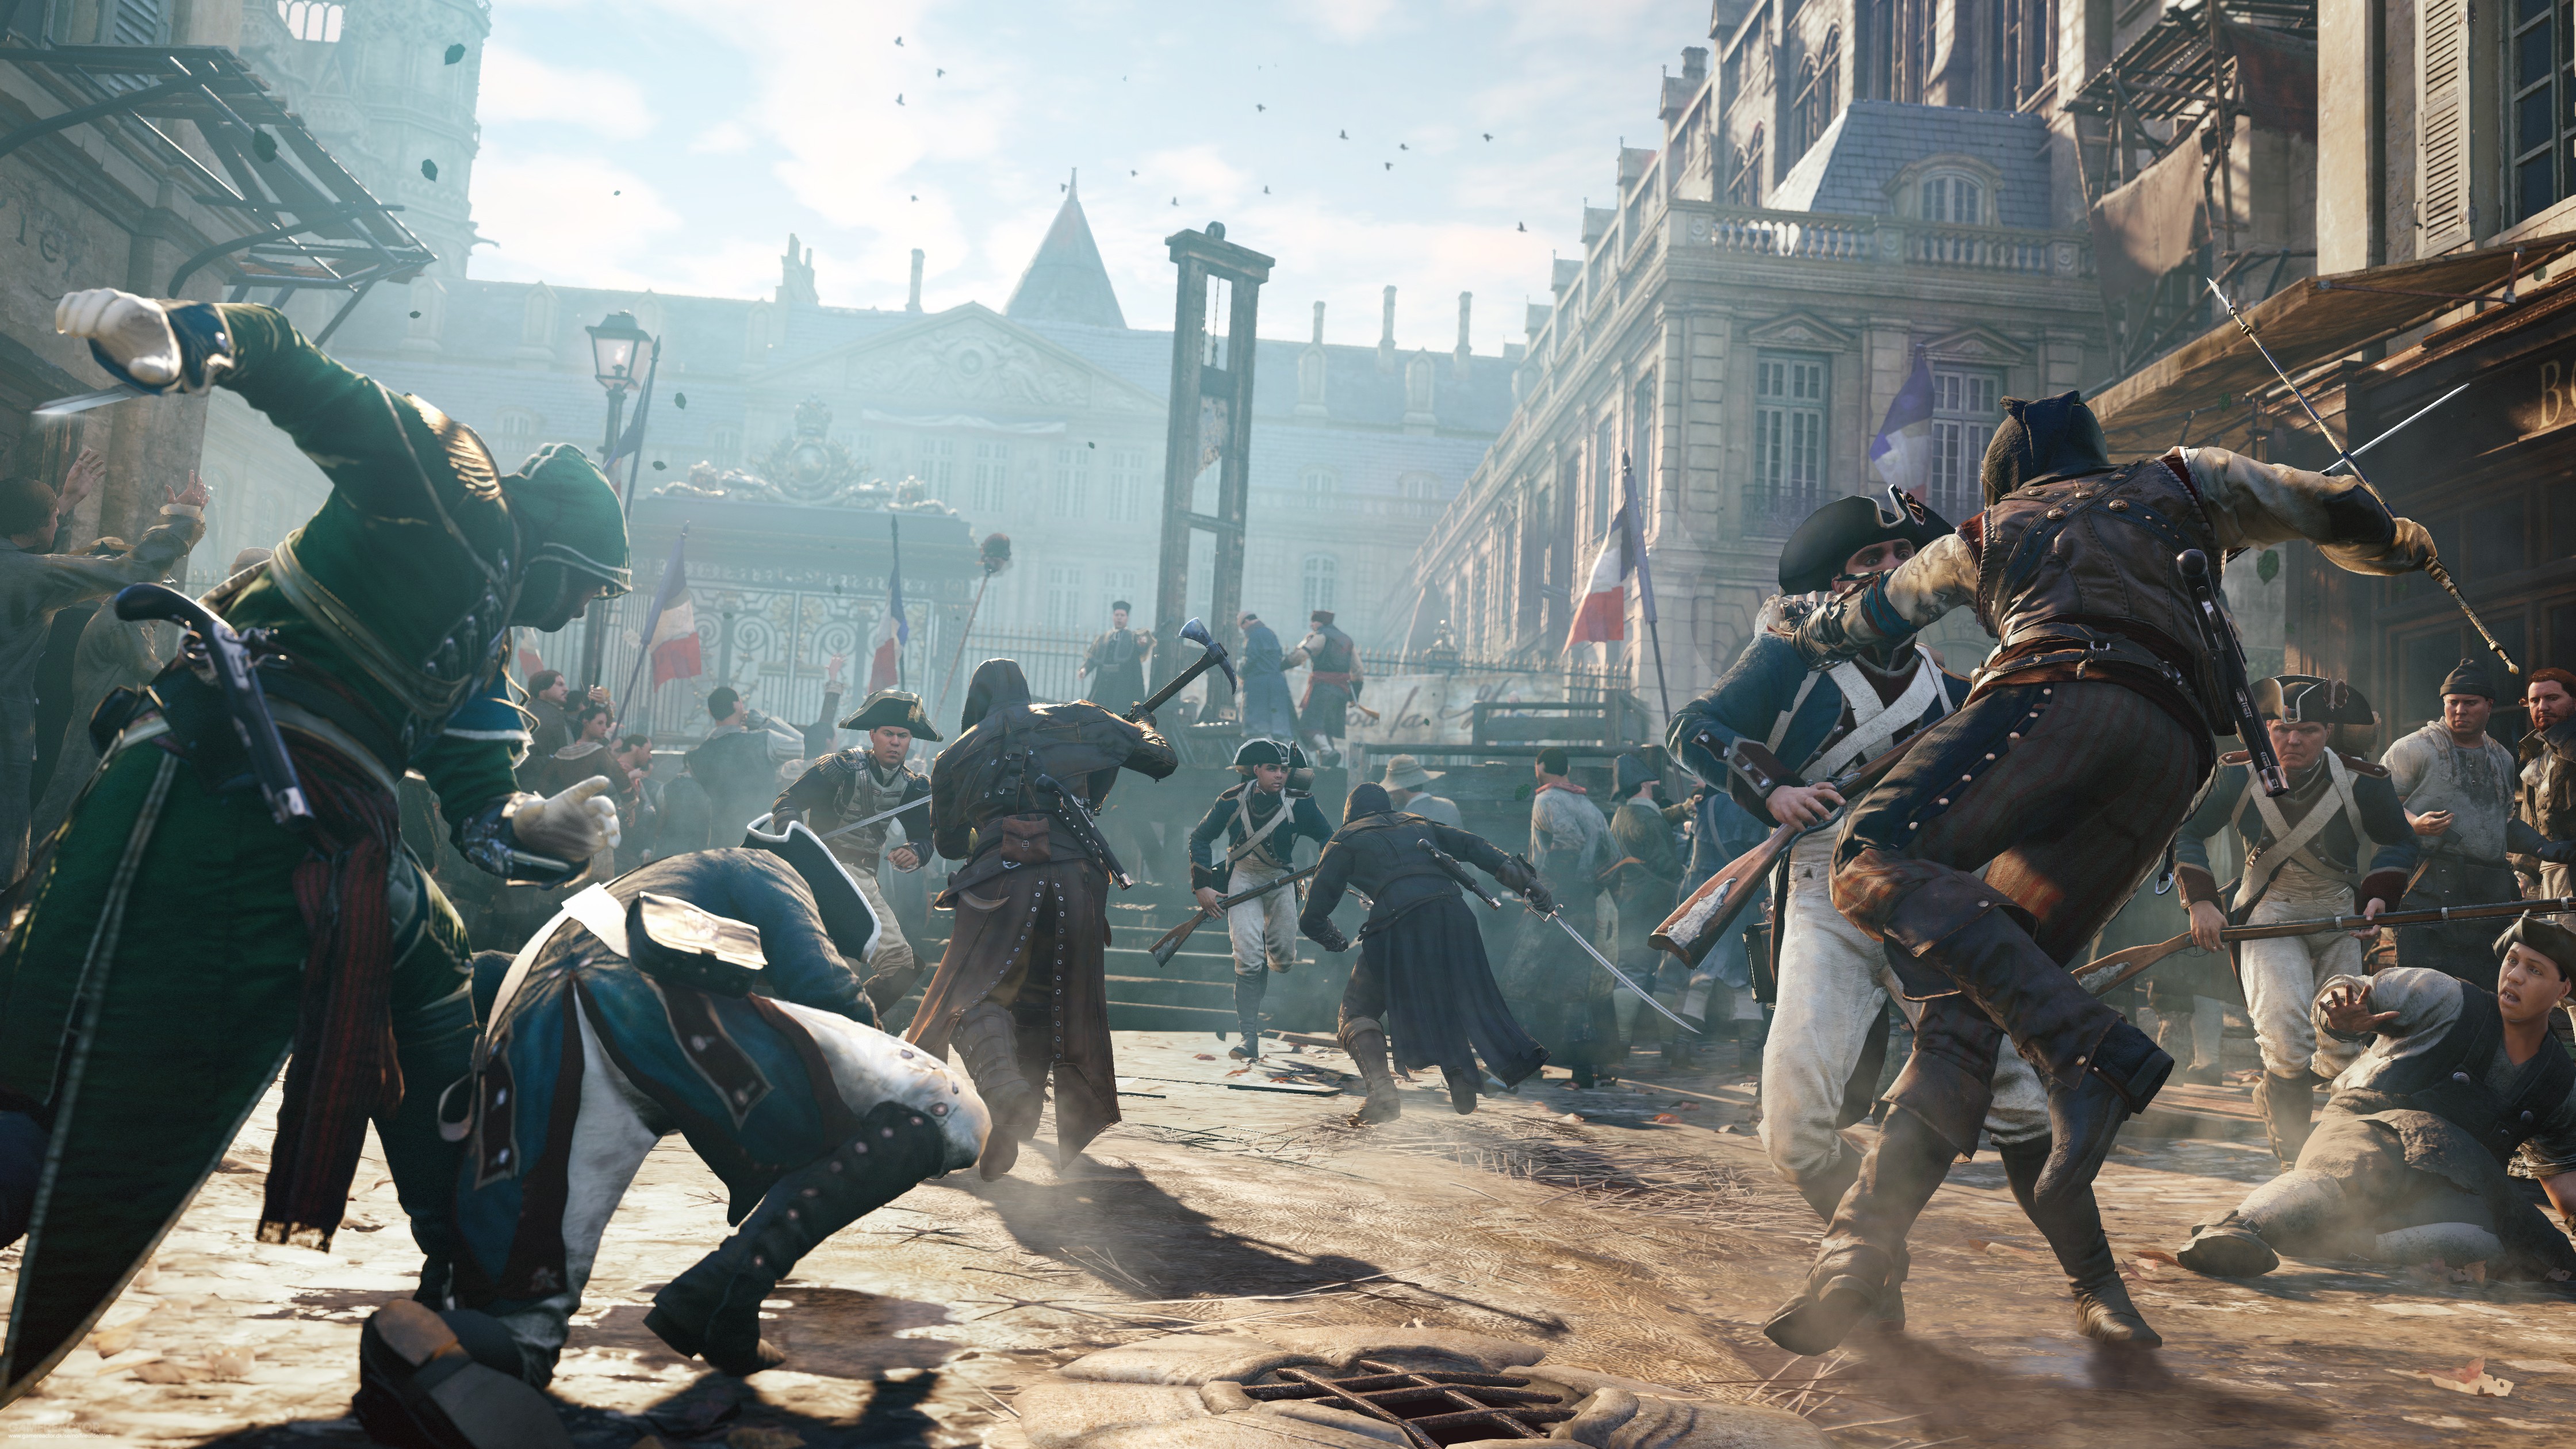 Assassin's Creed: Unity PC specs detailed